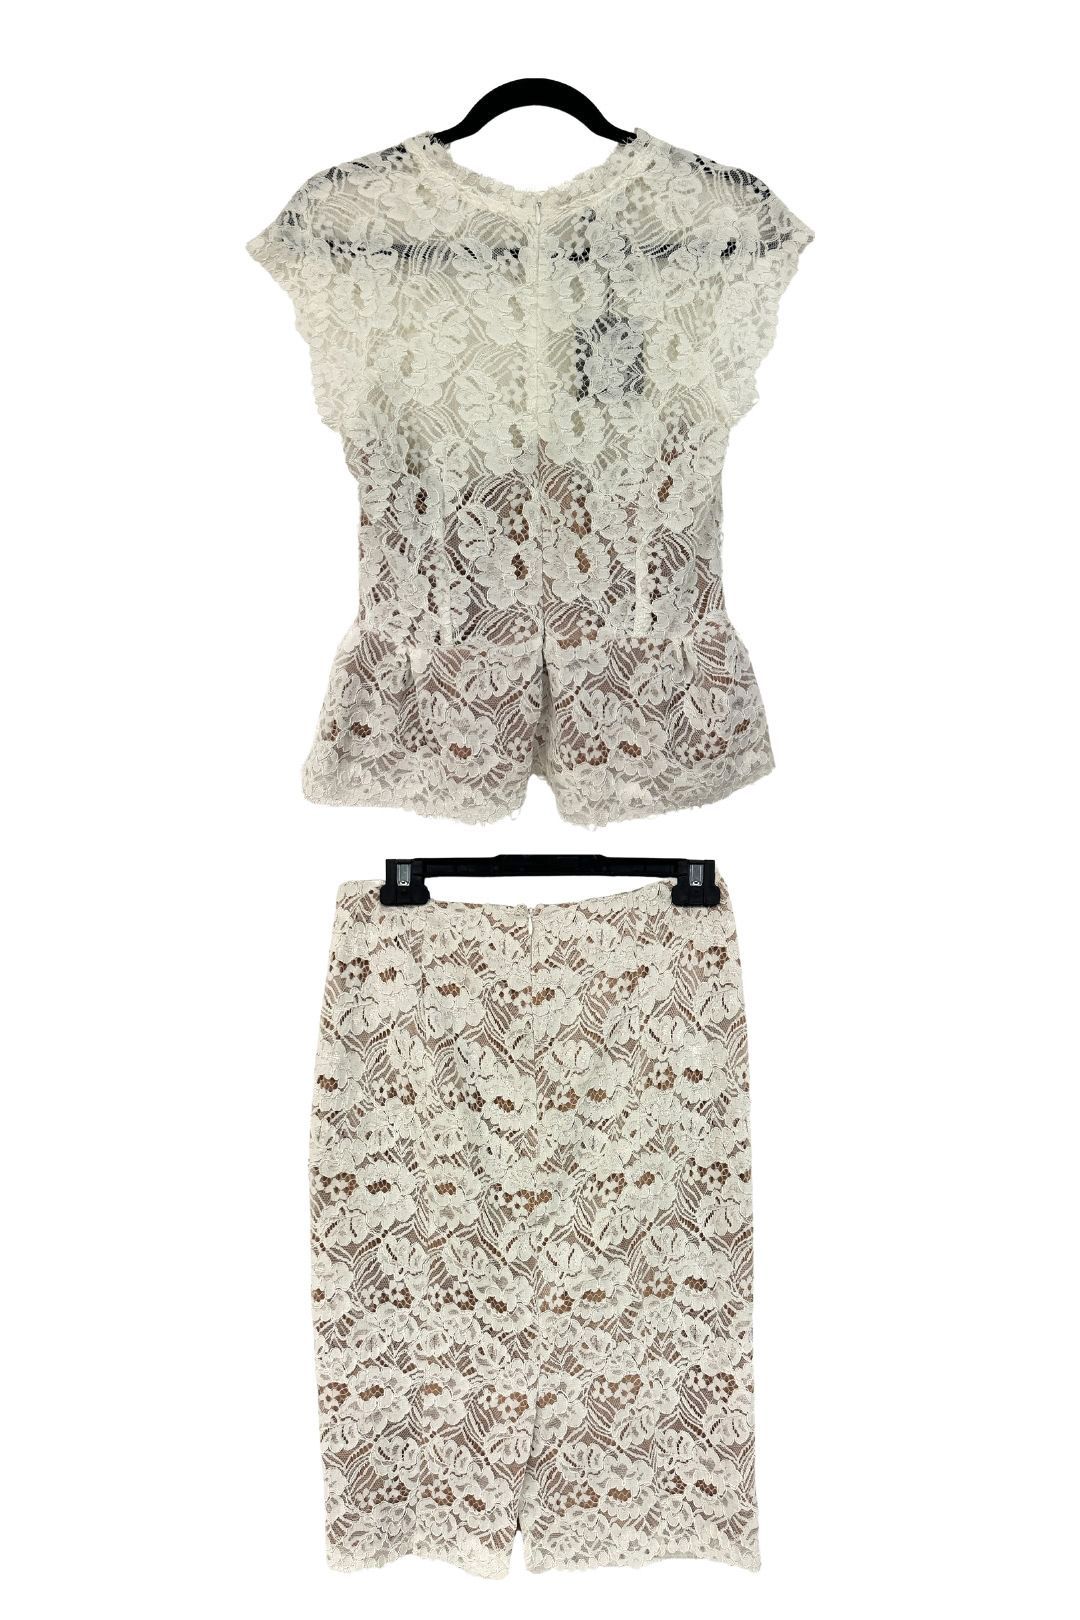 Witchery Lace Top and Skirt Set in Cream